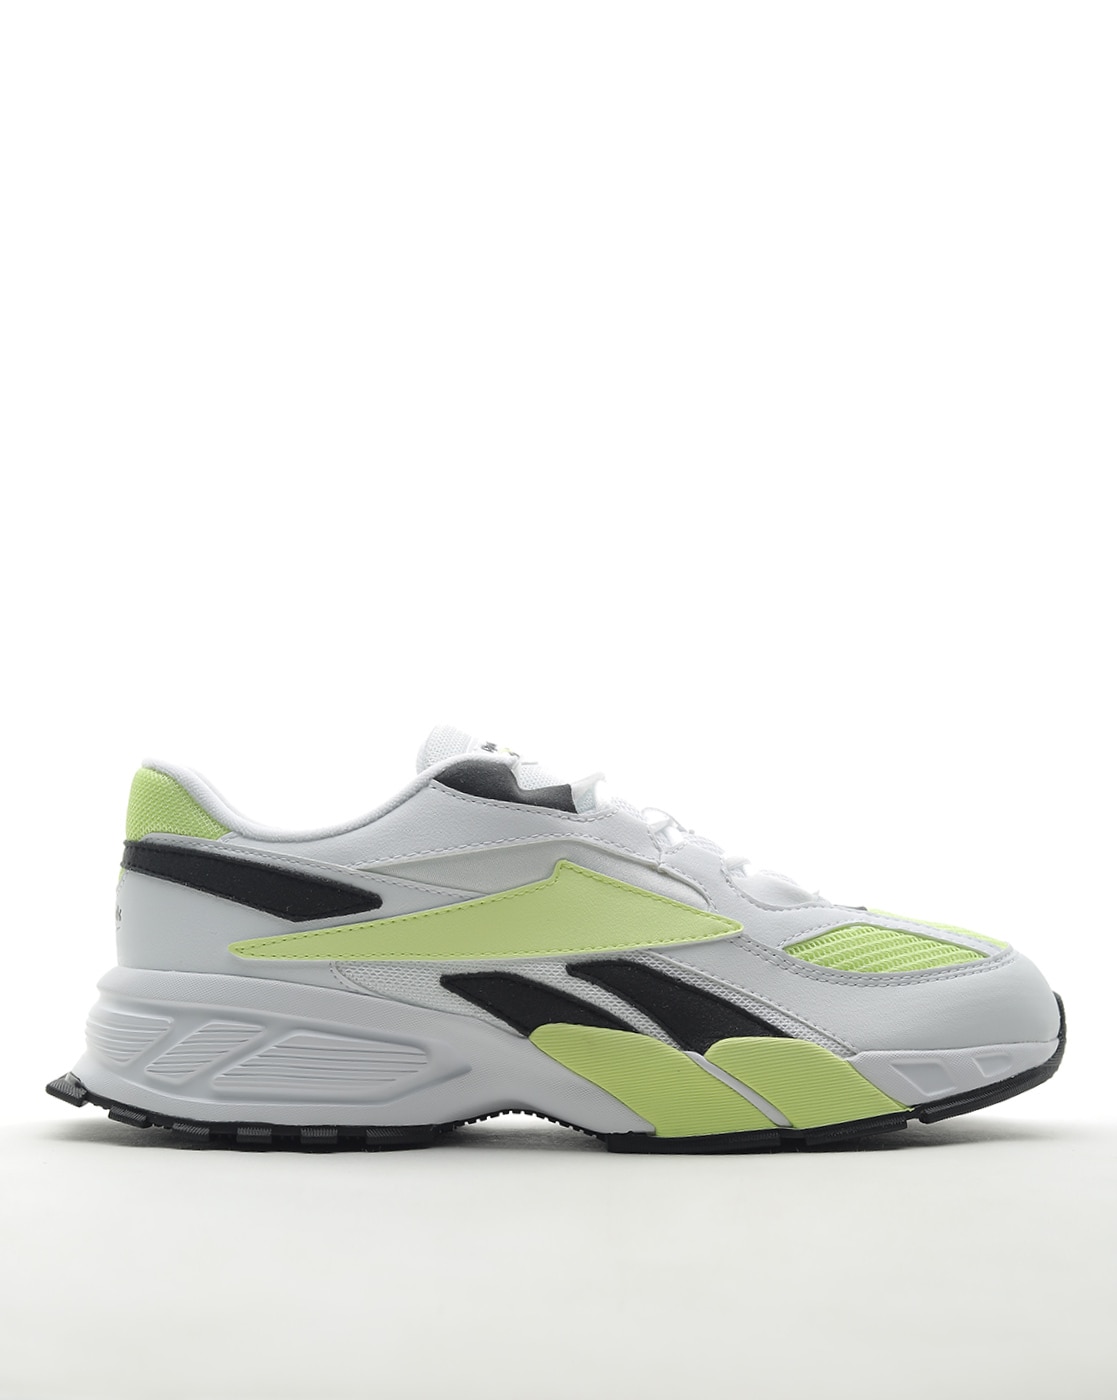 reebok sneakers shoes price in india